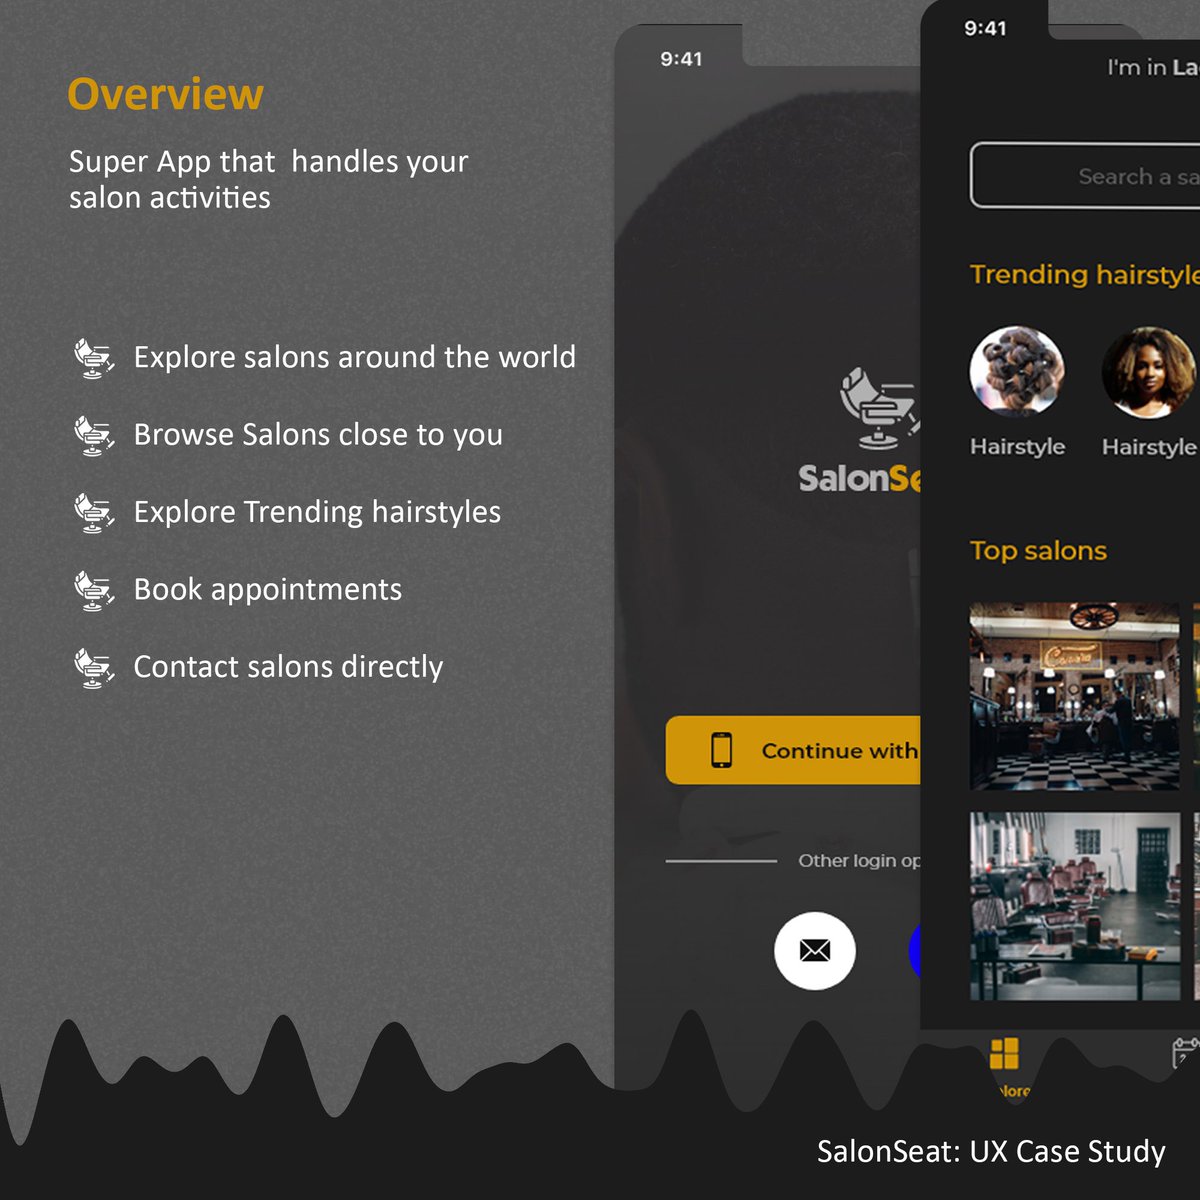 OVERVIEWSalonSeat App makes connecting with your favorite hair salons possible in a blink of an eye. When you’re in a new city or new country, the headache and scare of who you could get your hair styled, trimmed, or shaved has been brought to an end.